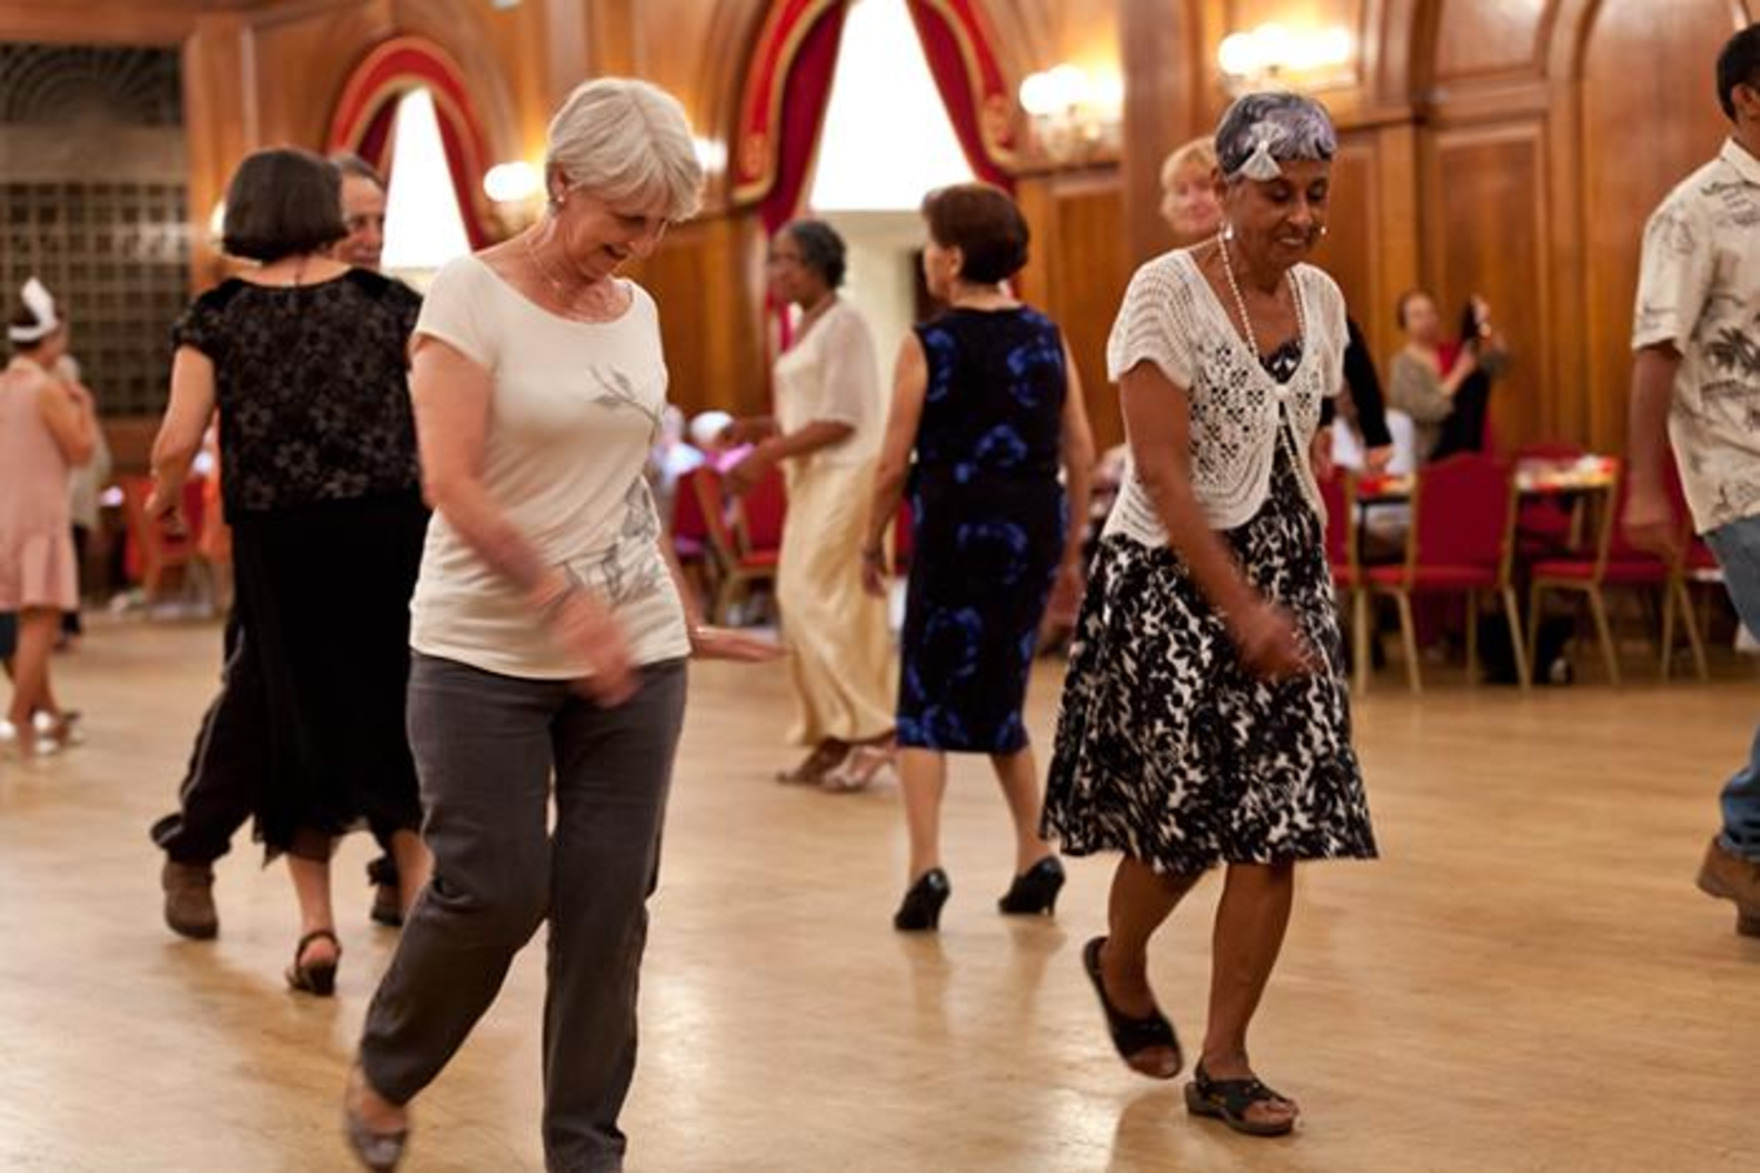 OPEN AGE CELEBRATES 25 YEARS OF CHAMPIONING AN ACTIVE LIFE FOR OLDER PEOPLE